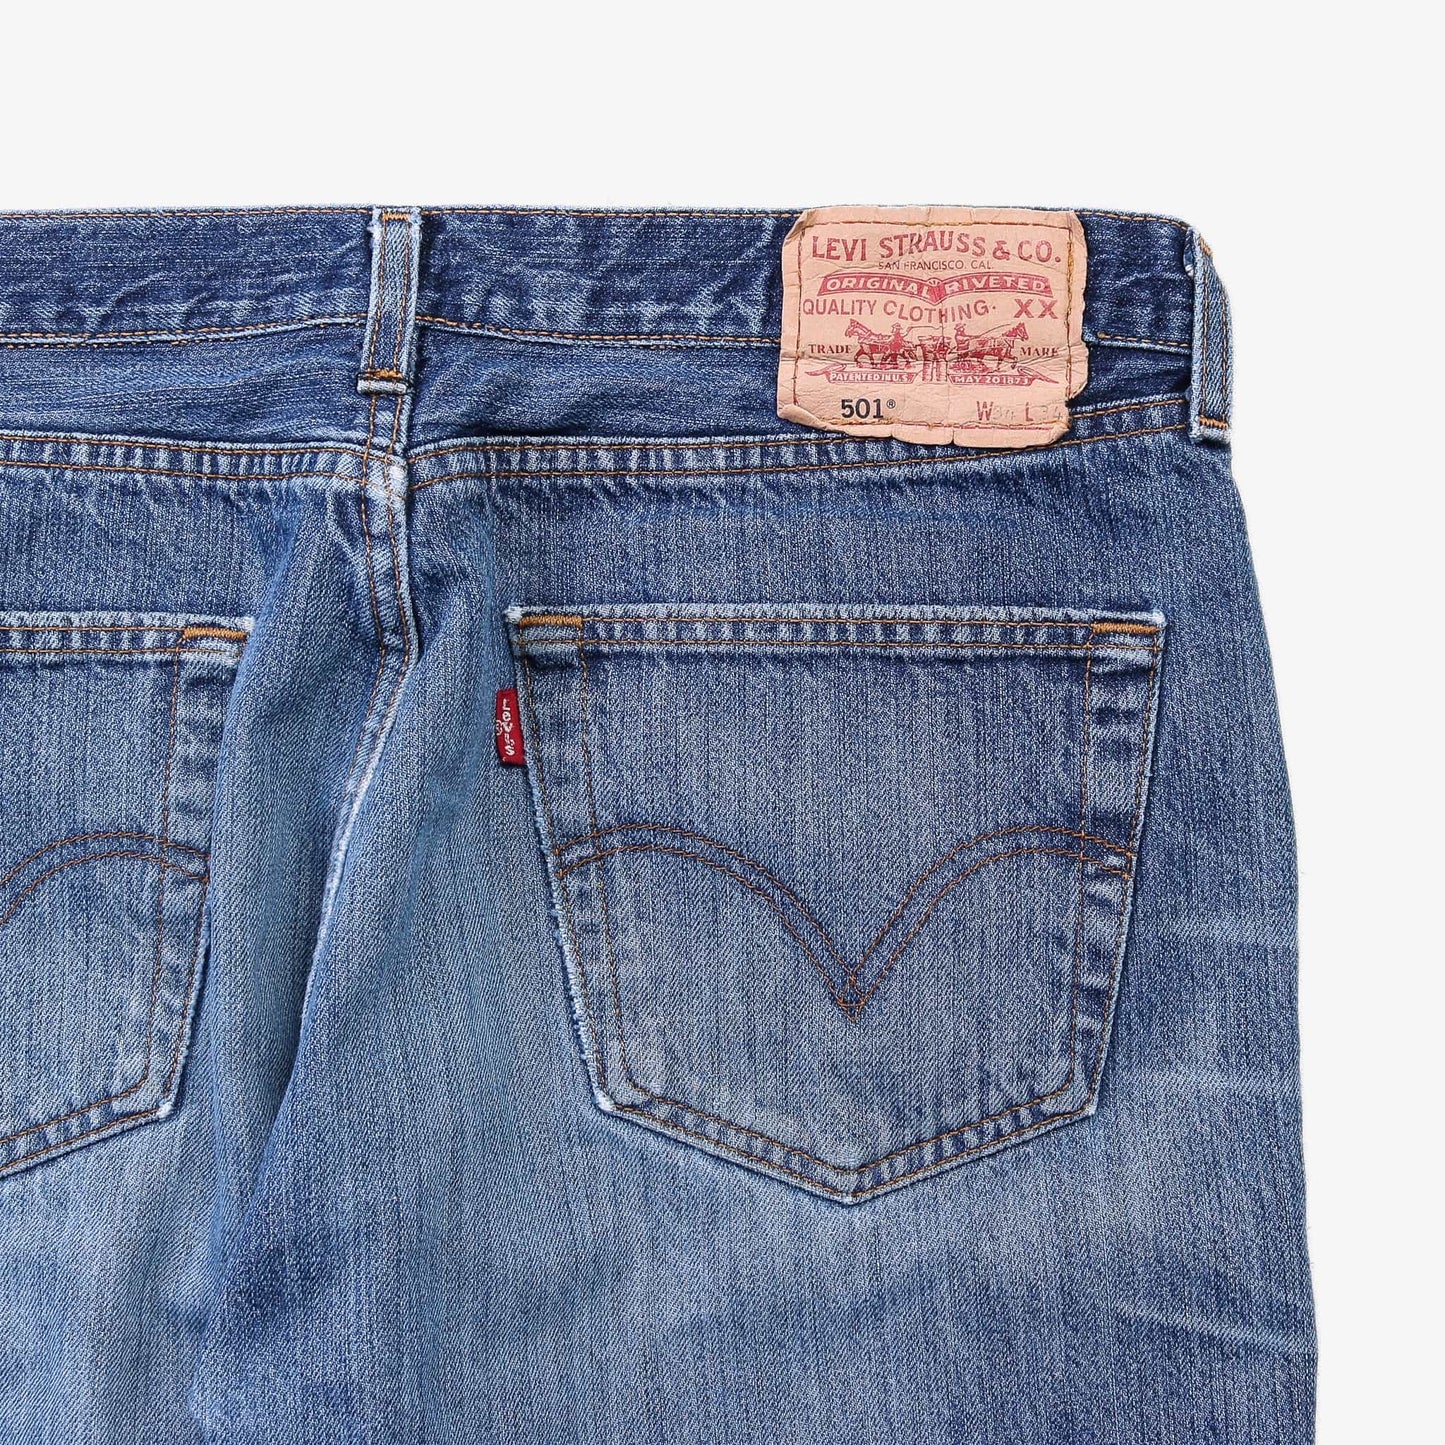 Vintage Levi's 501 Jeans - 34" 34" - American Madness